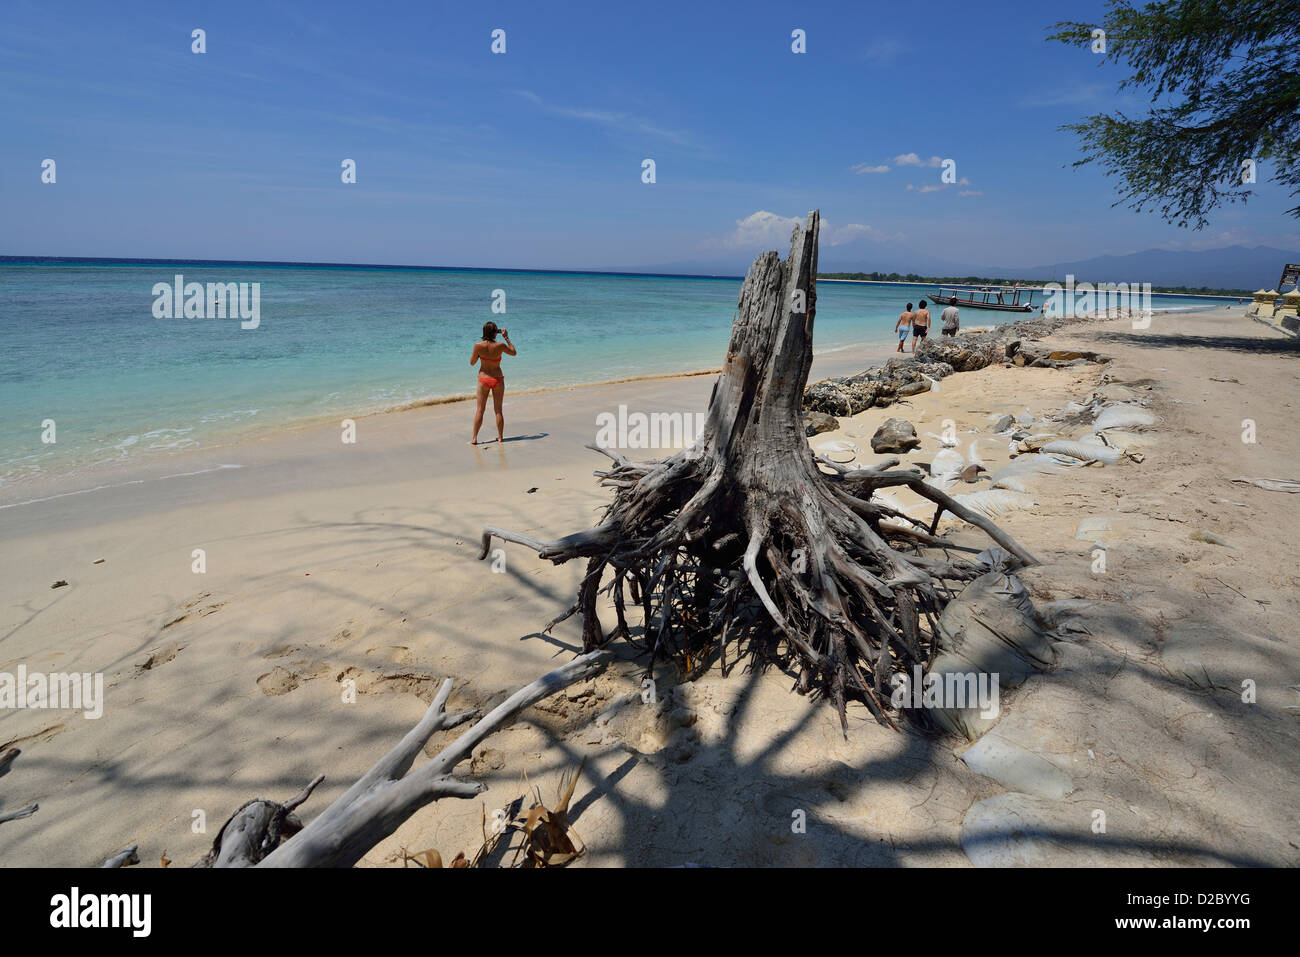 A dead tree in the beach at the tropical island of Gili Trawangan; Lombok, Indonesia. Stock Photo